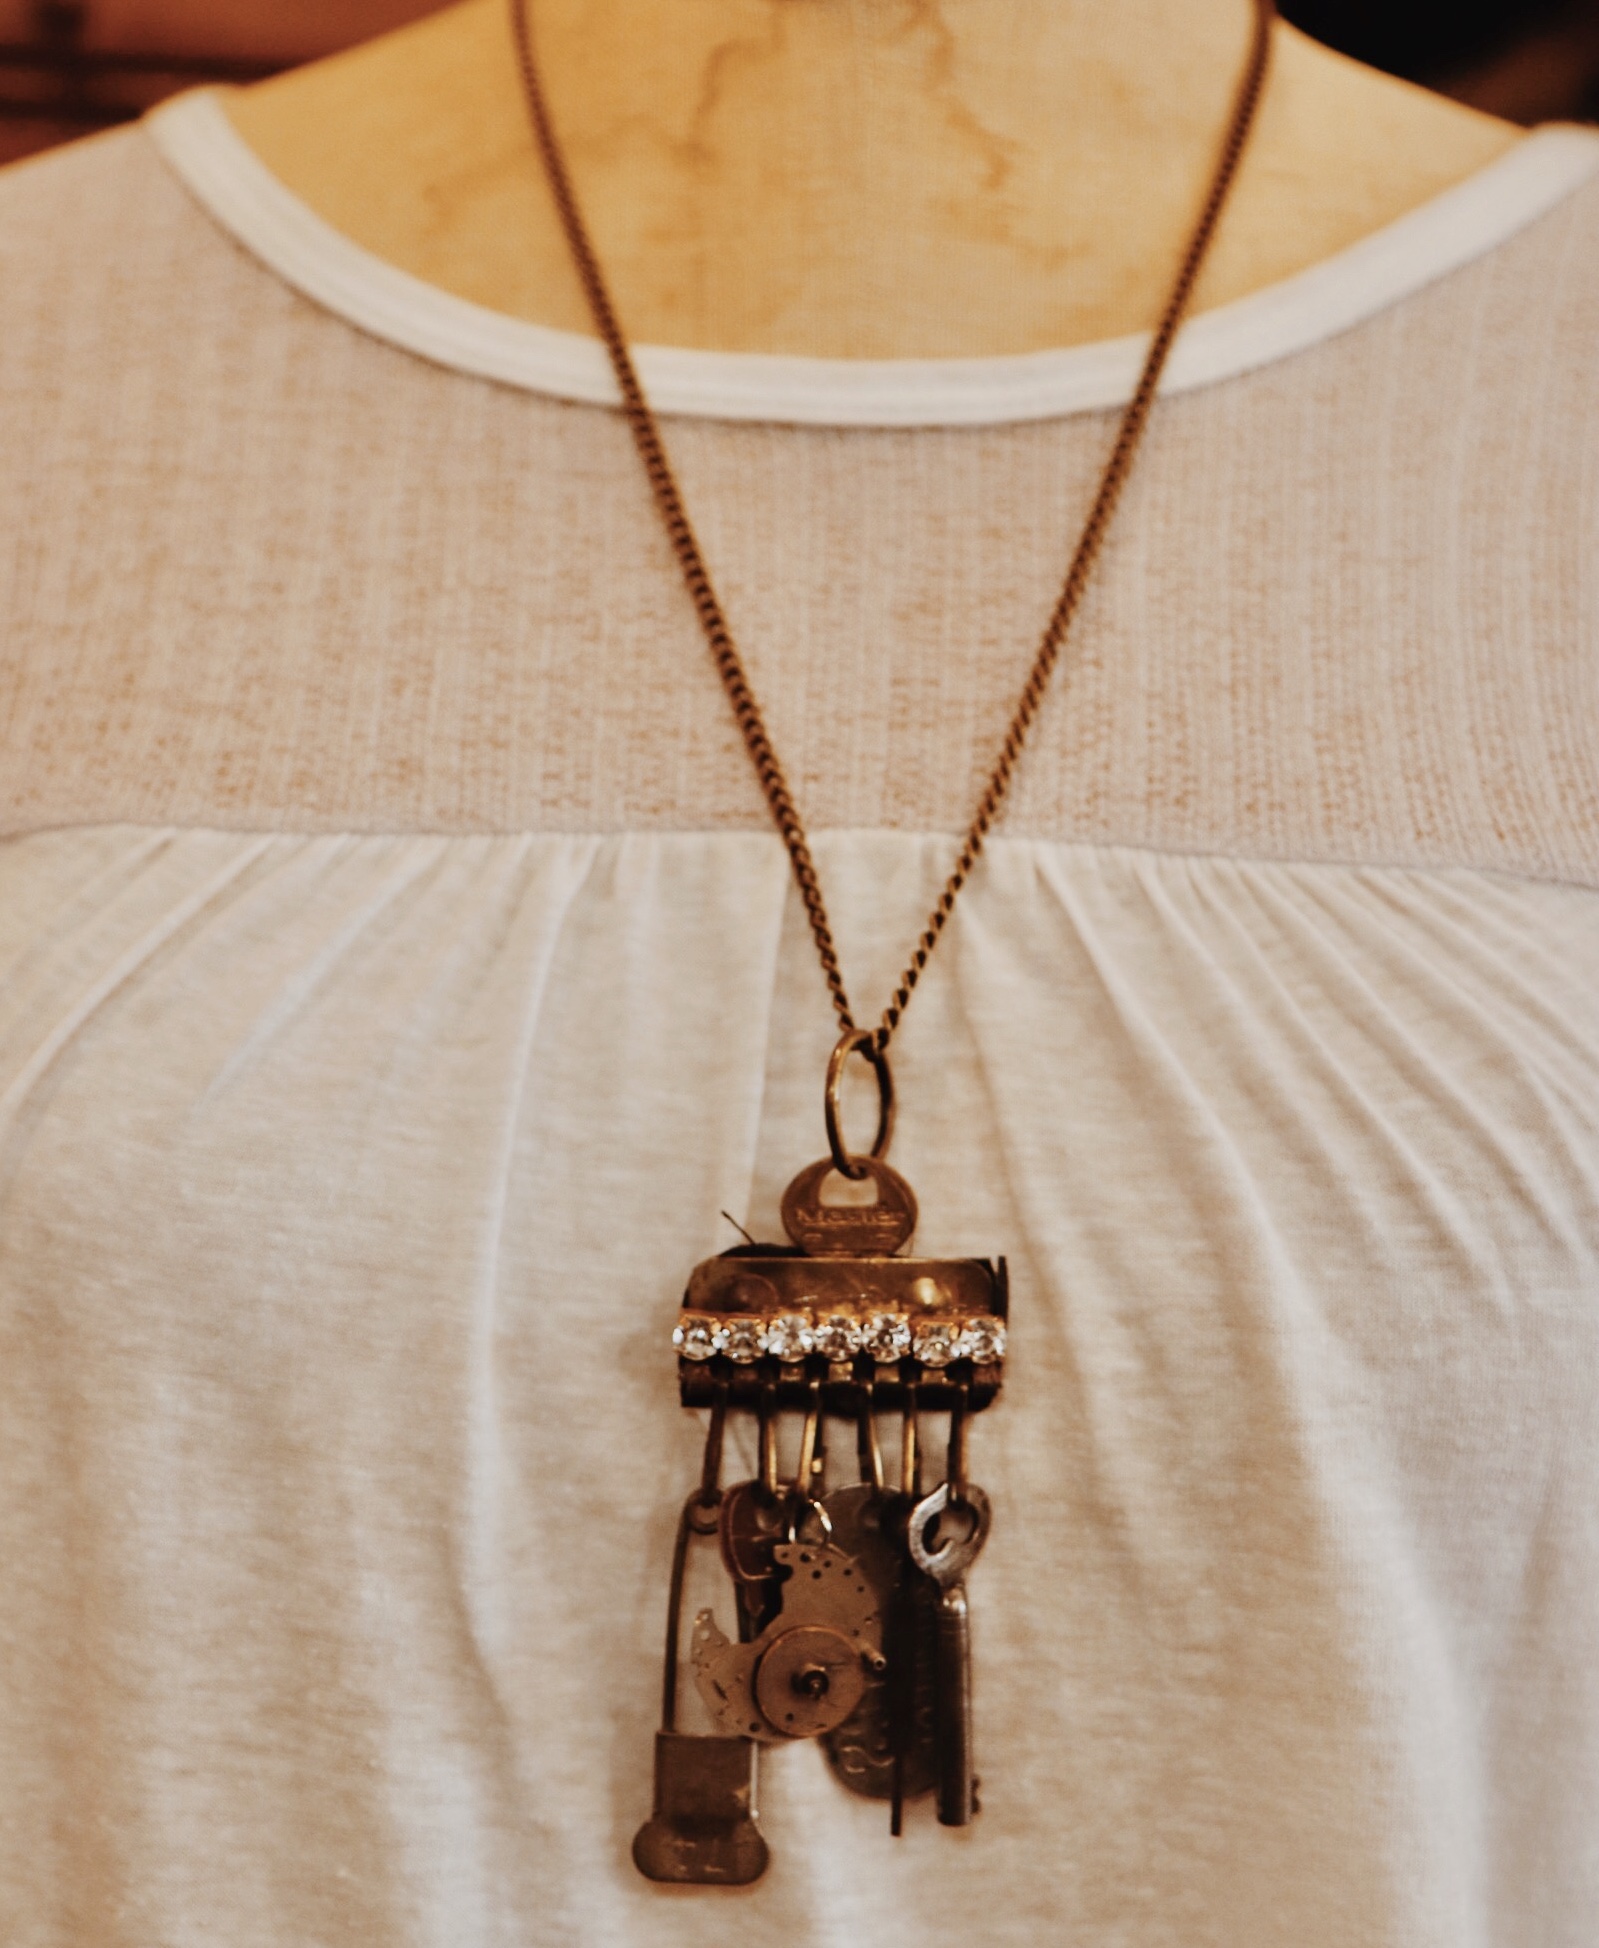 This handmade necklace has an assortment of vintage trinket as the pendant and hangs on a 26 inch chain!